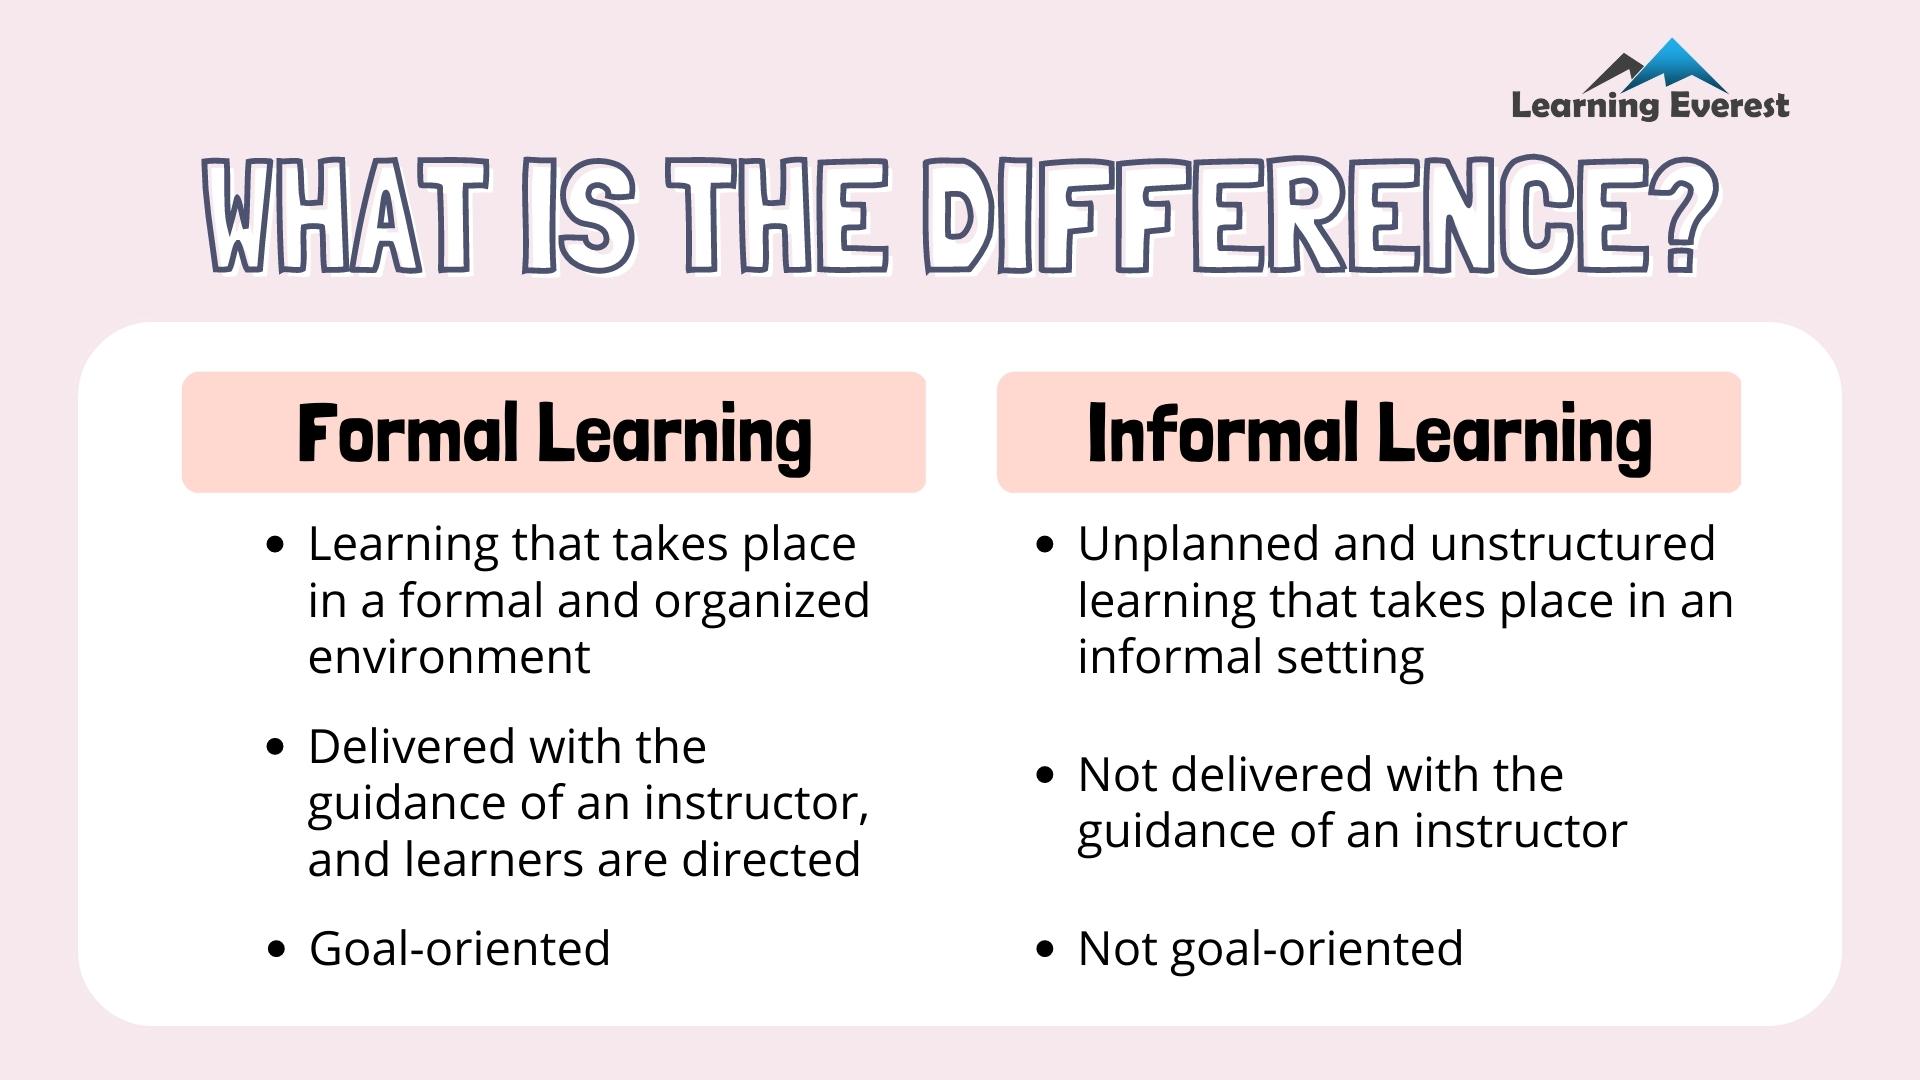 What is the difference between formal and informal learning